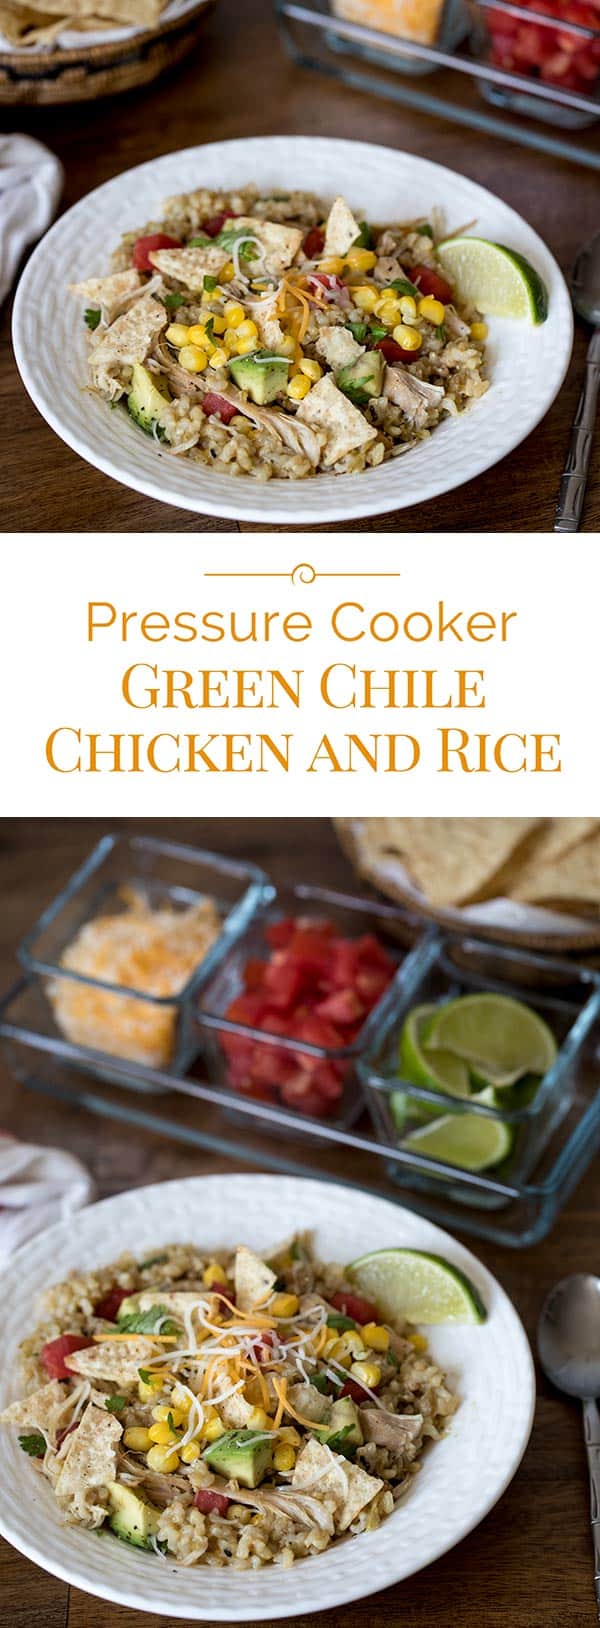 Pressure-Cooker-Green-Chile-Chicken-and-Rice-Collage-Pressure-Cooking-Today